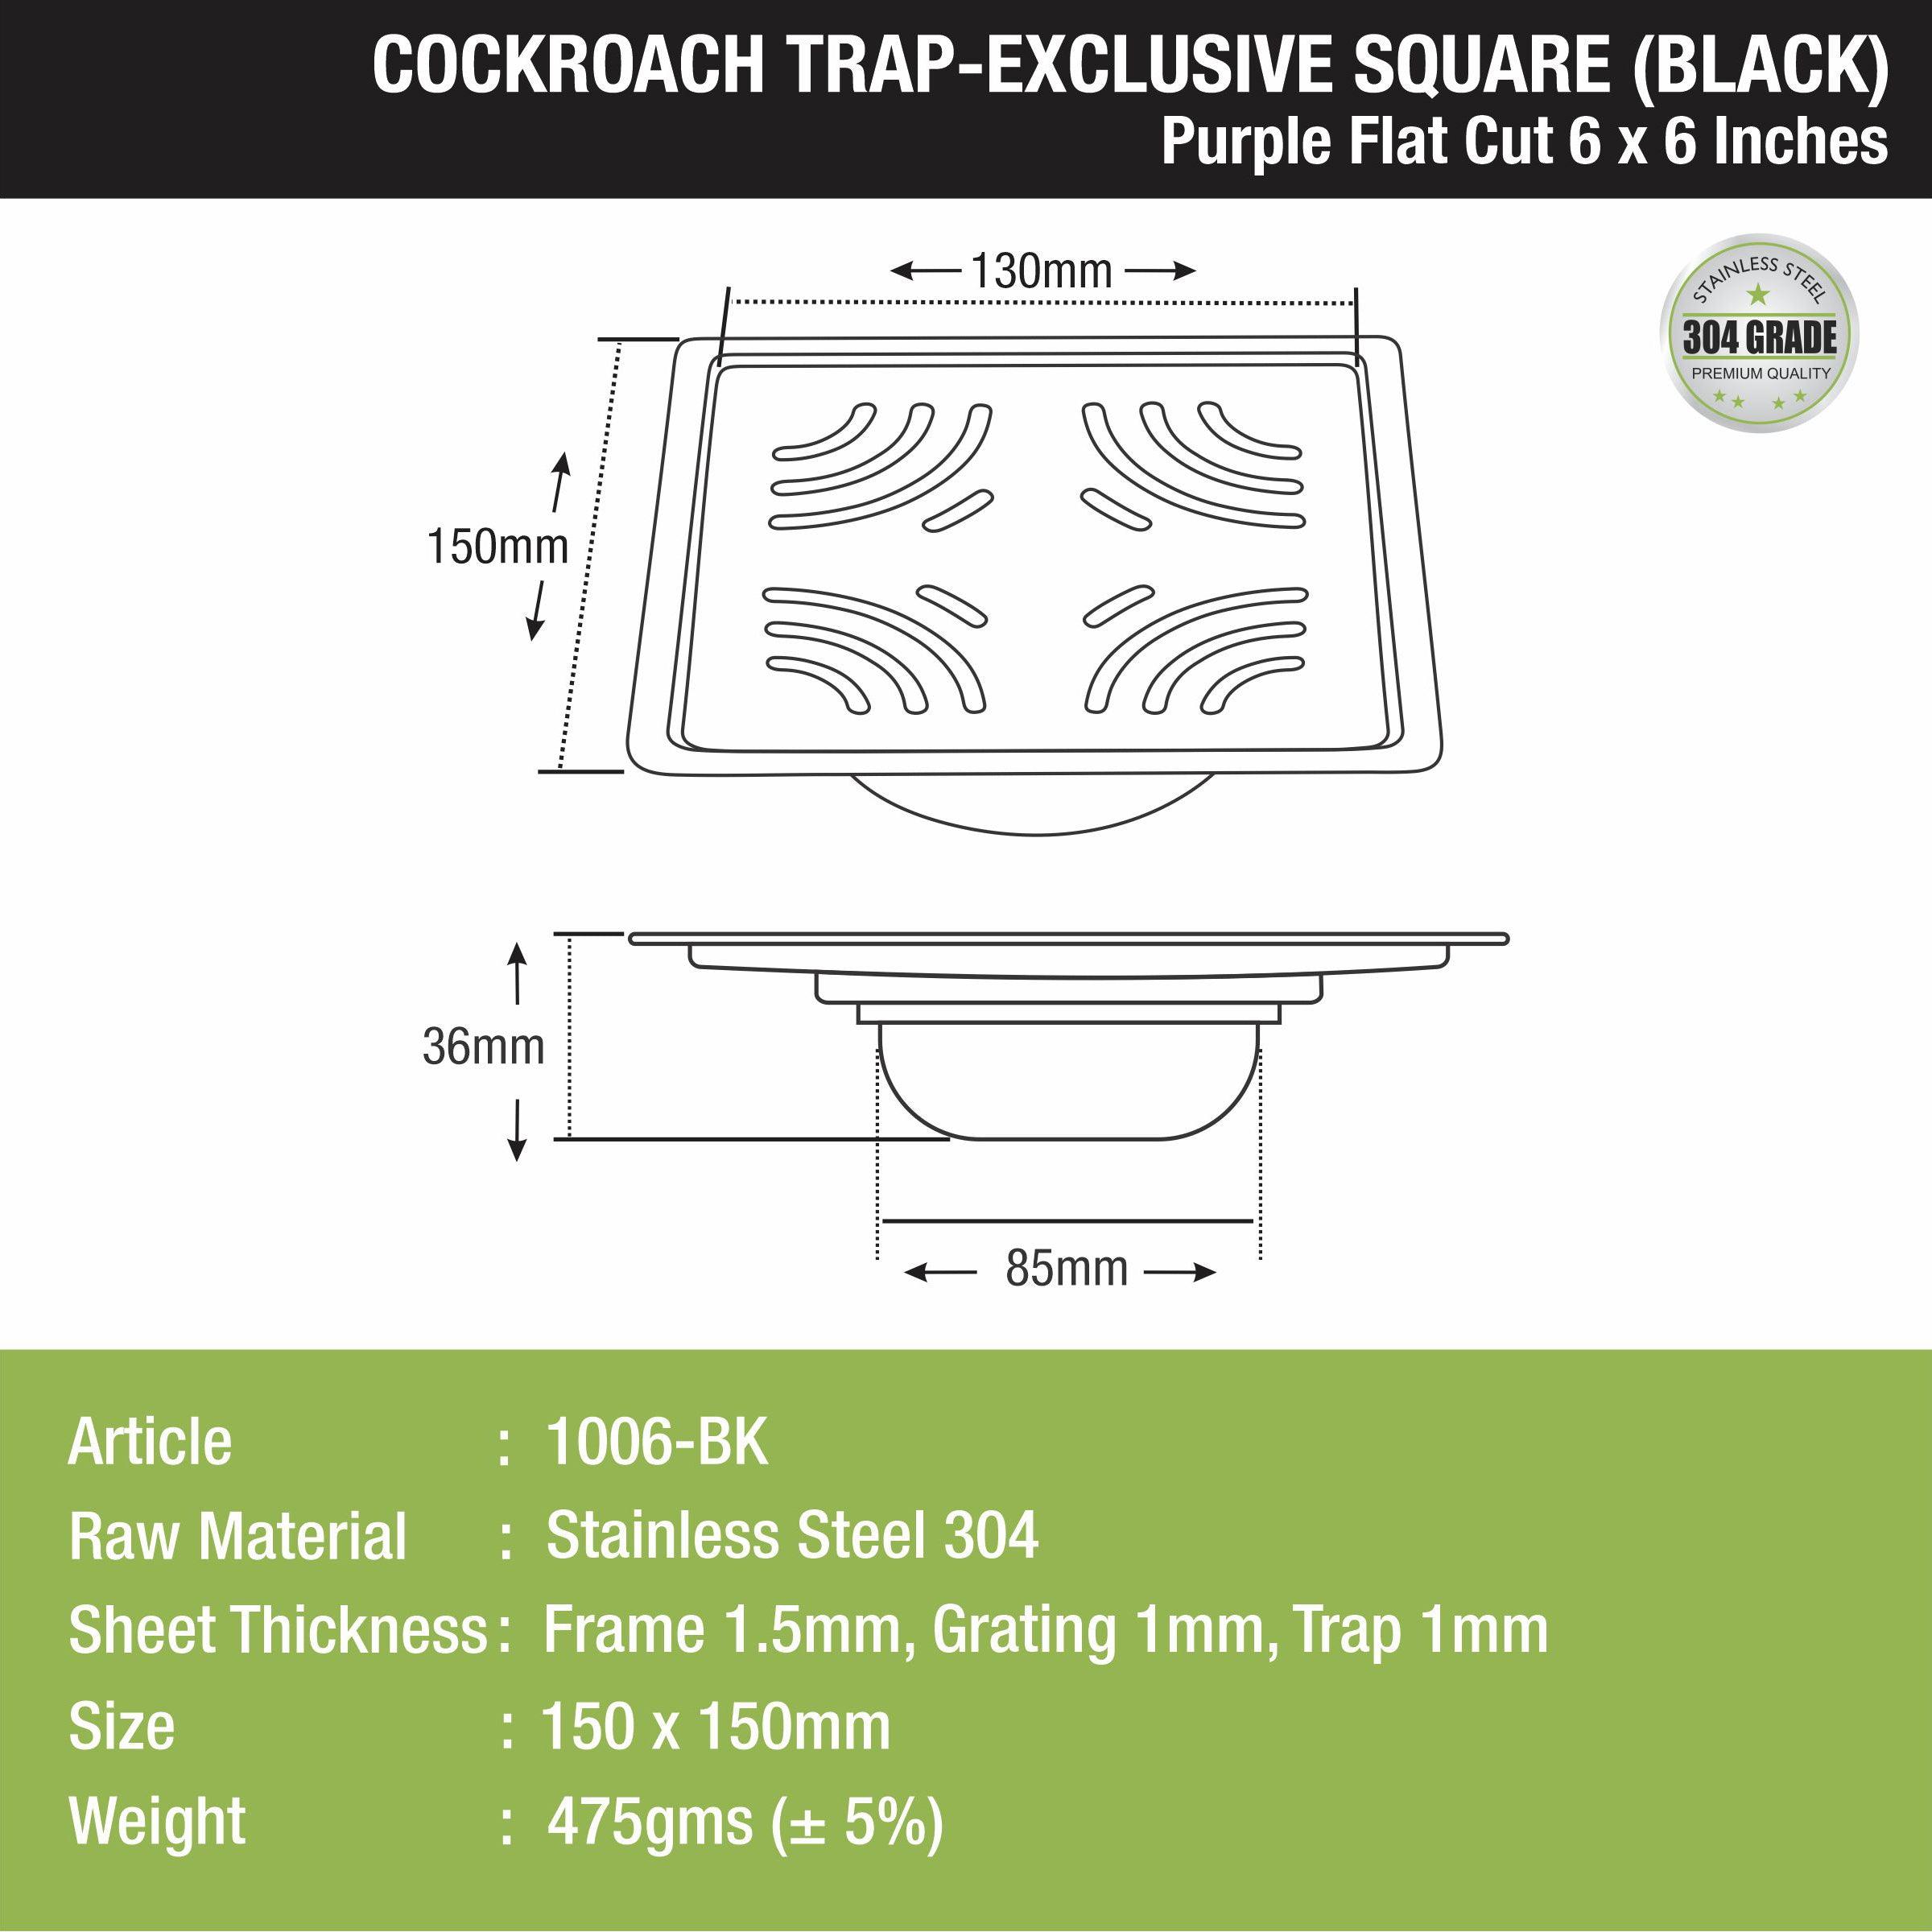 Purple Exclusive Square Flat Cut Floor Drain in Black PVD Coating (6 x 6 Inches) with Cockroach Trap size and measurement 